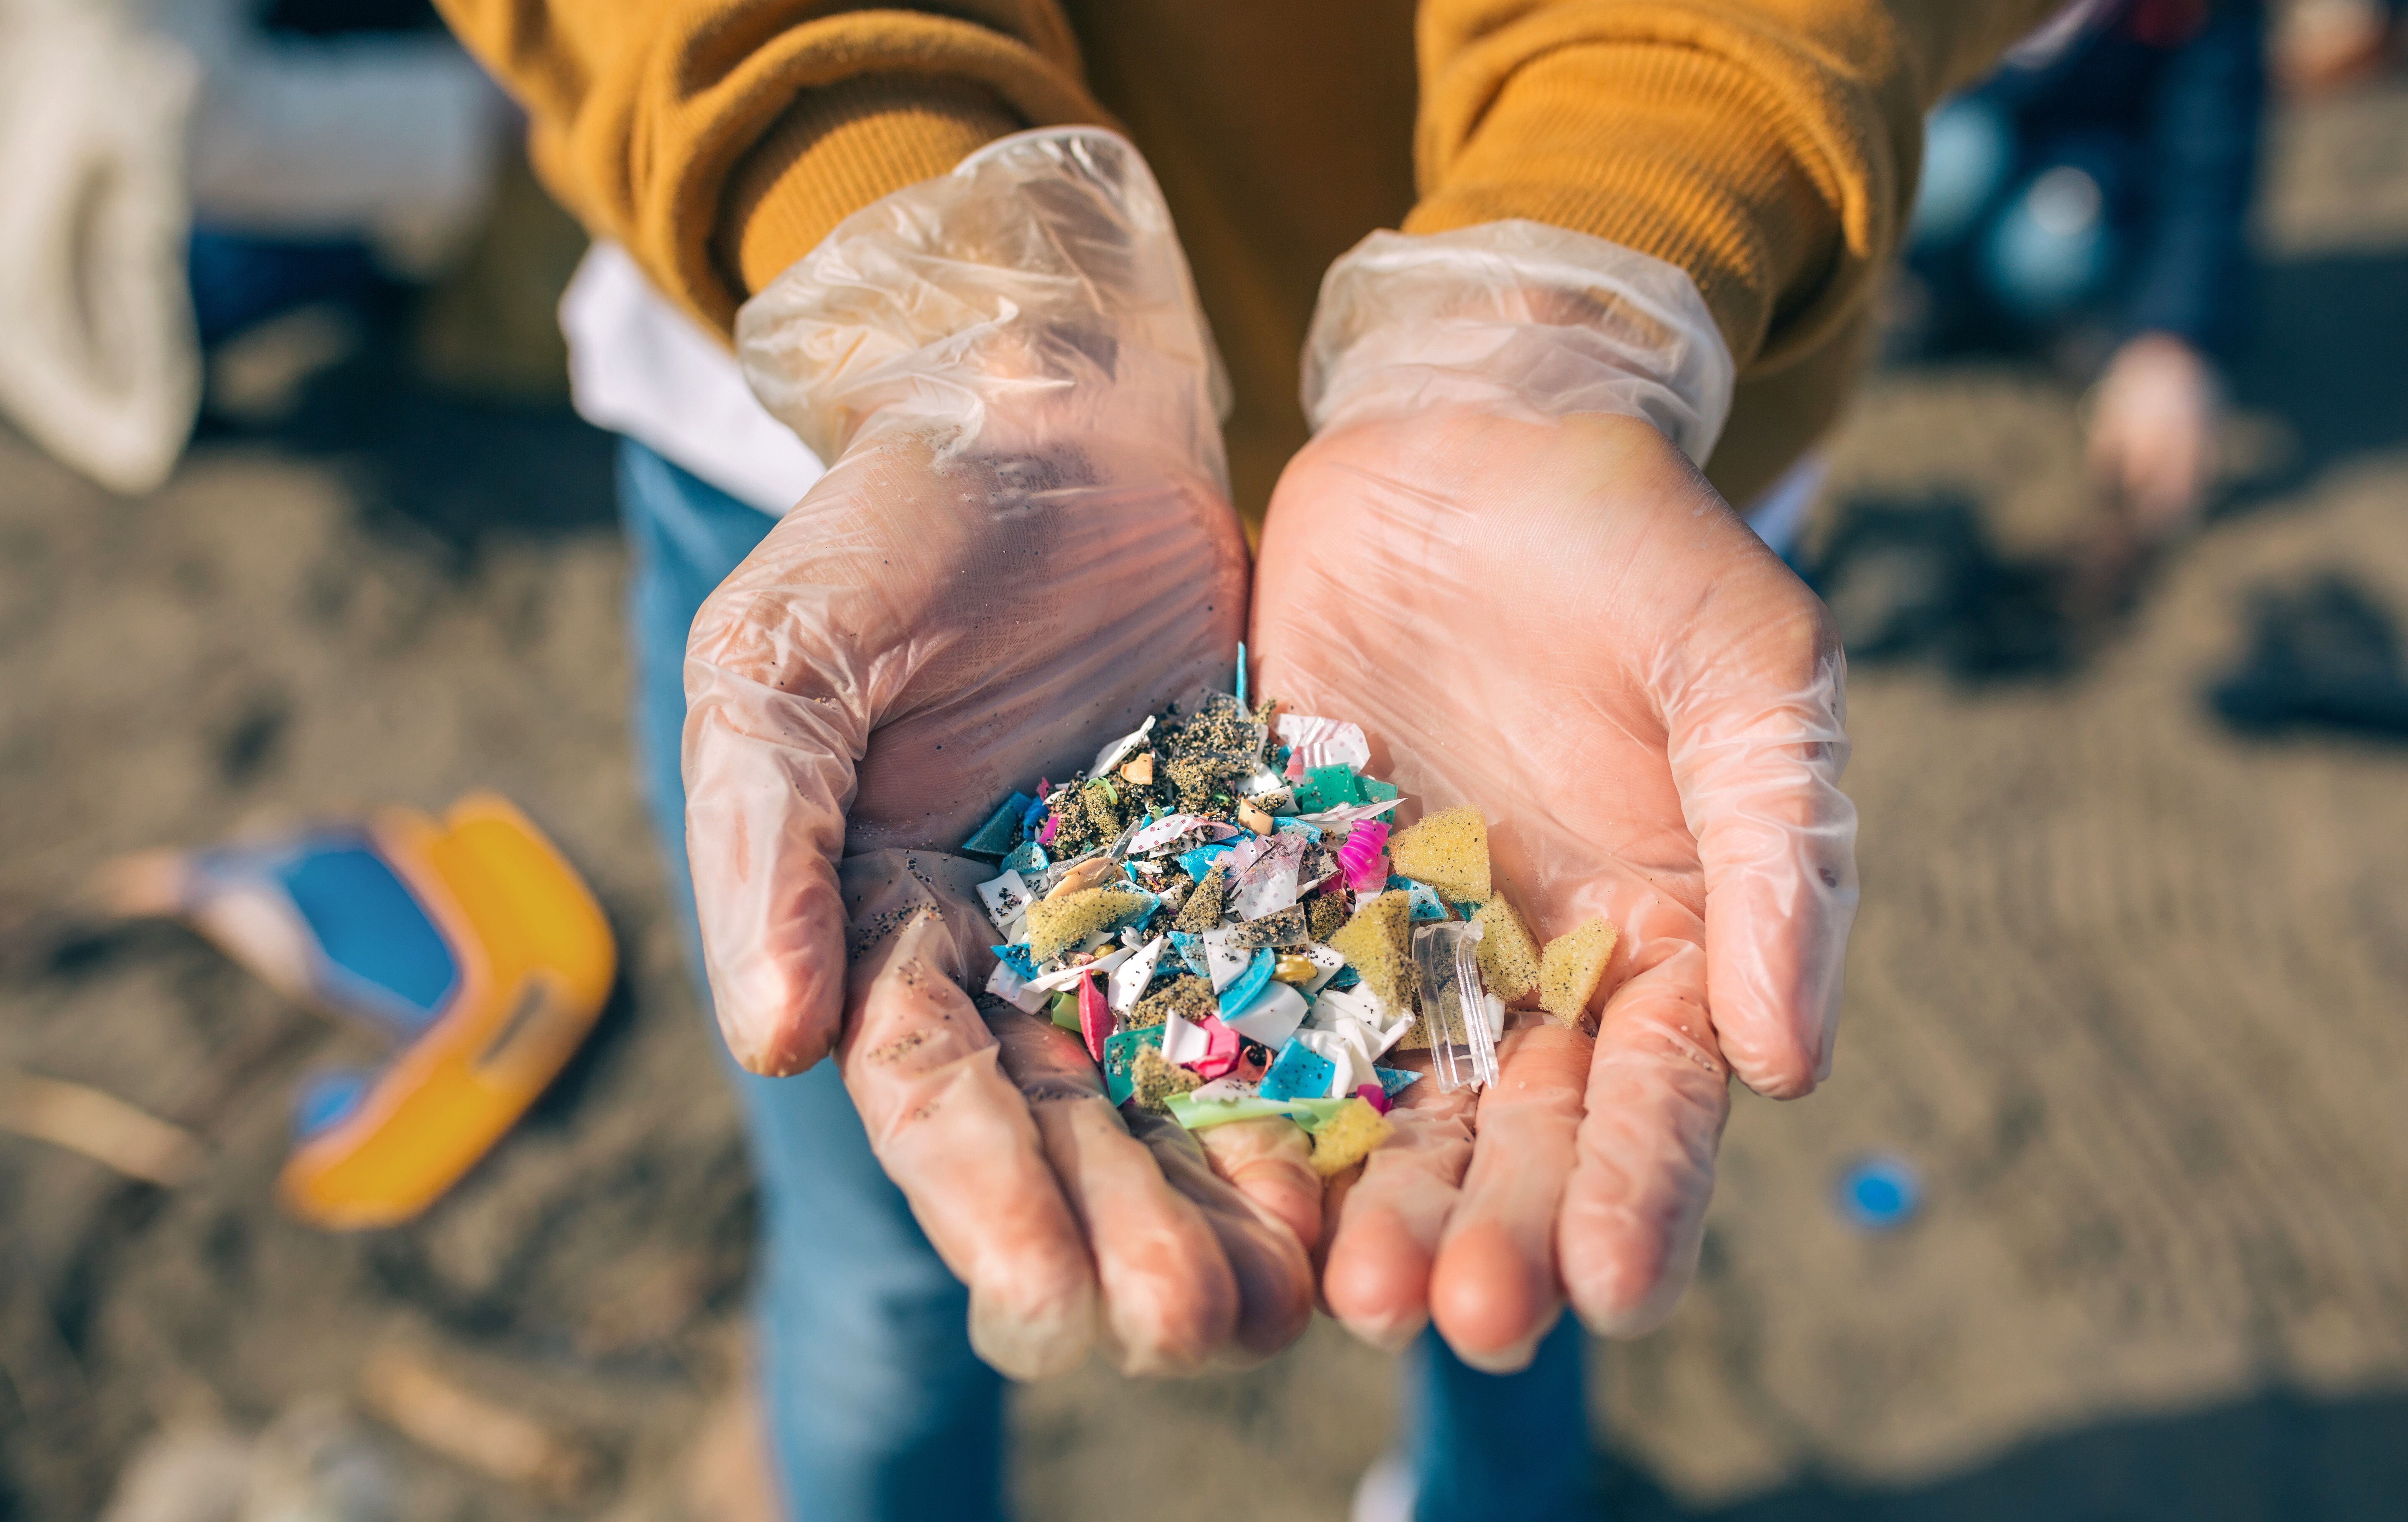 Plastic bottles, bags, wrapping and packaging wash up daily on our beaches. Over time, these plastics disintegrate and can enter our ecosystem. Photo: Shutterstock